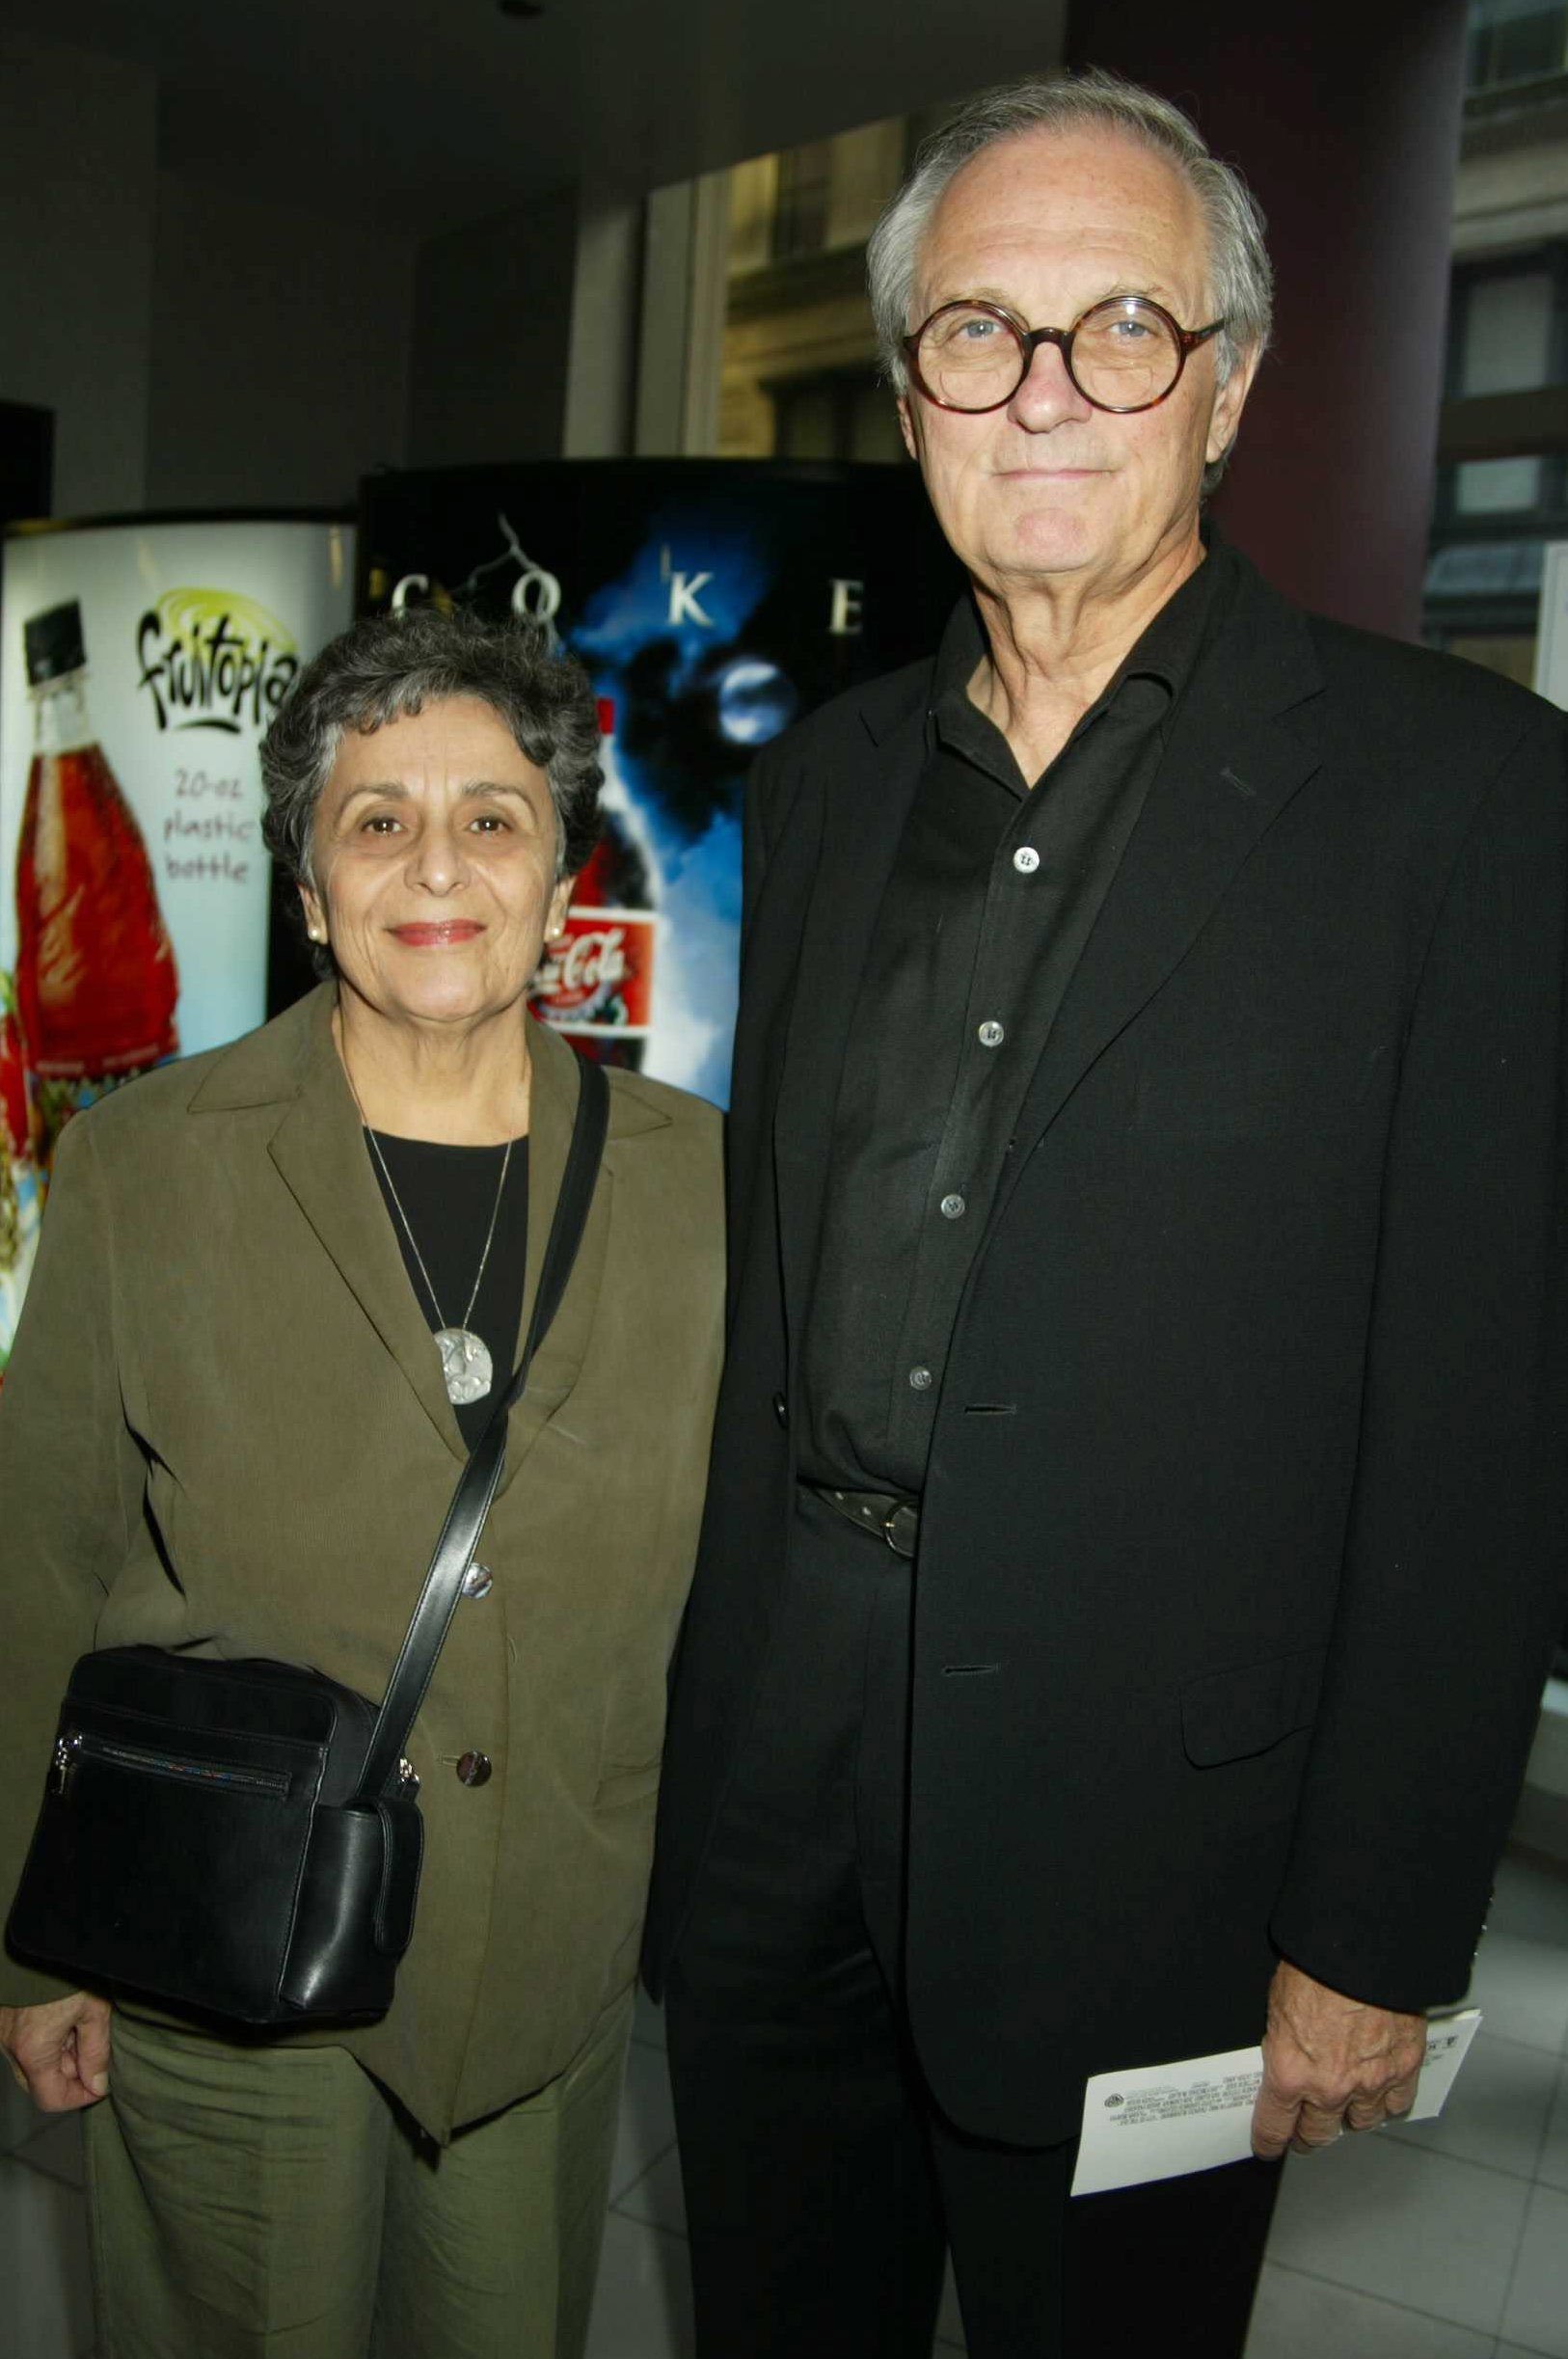 Arlene Alda and her husband Alan Alda during "City By The Sea" New York premiere at United Artists Union Square in New York, New York | Source: Getty Images